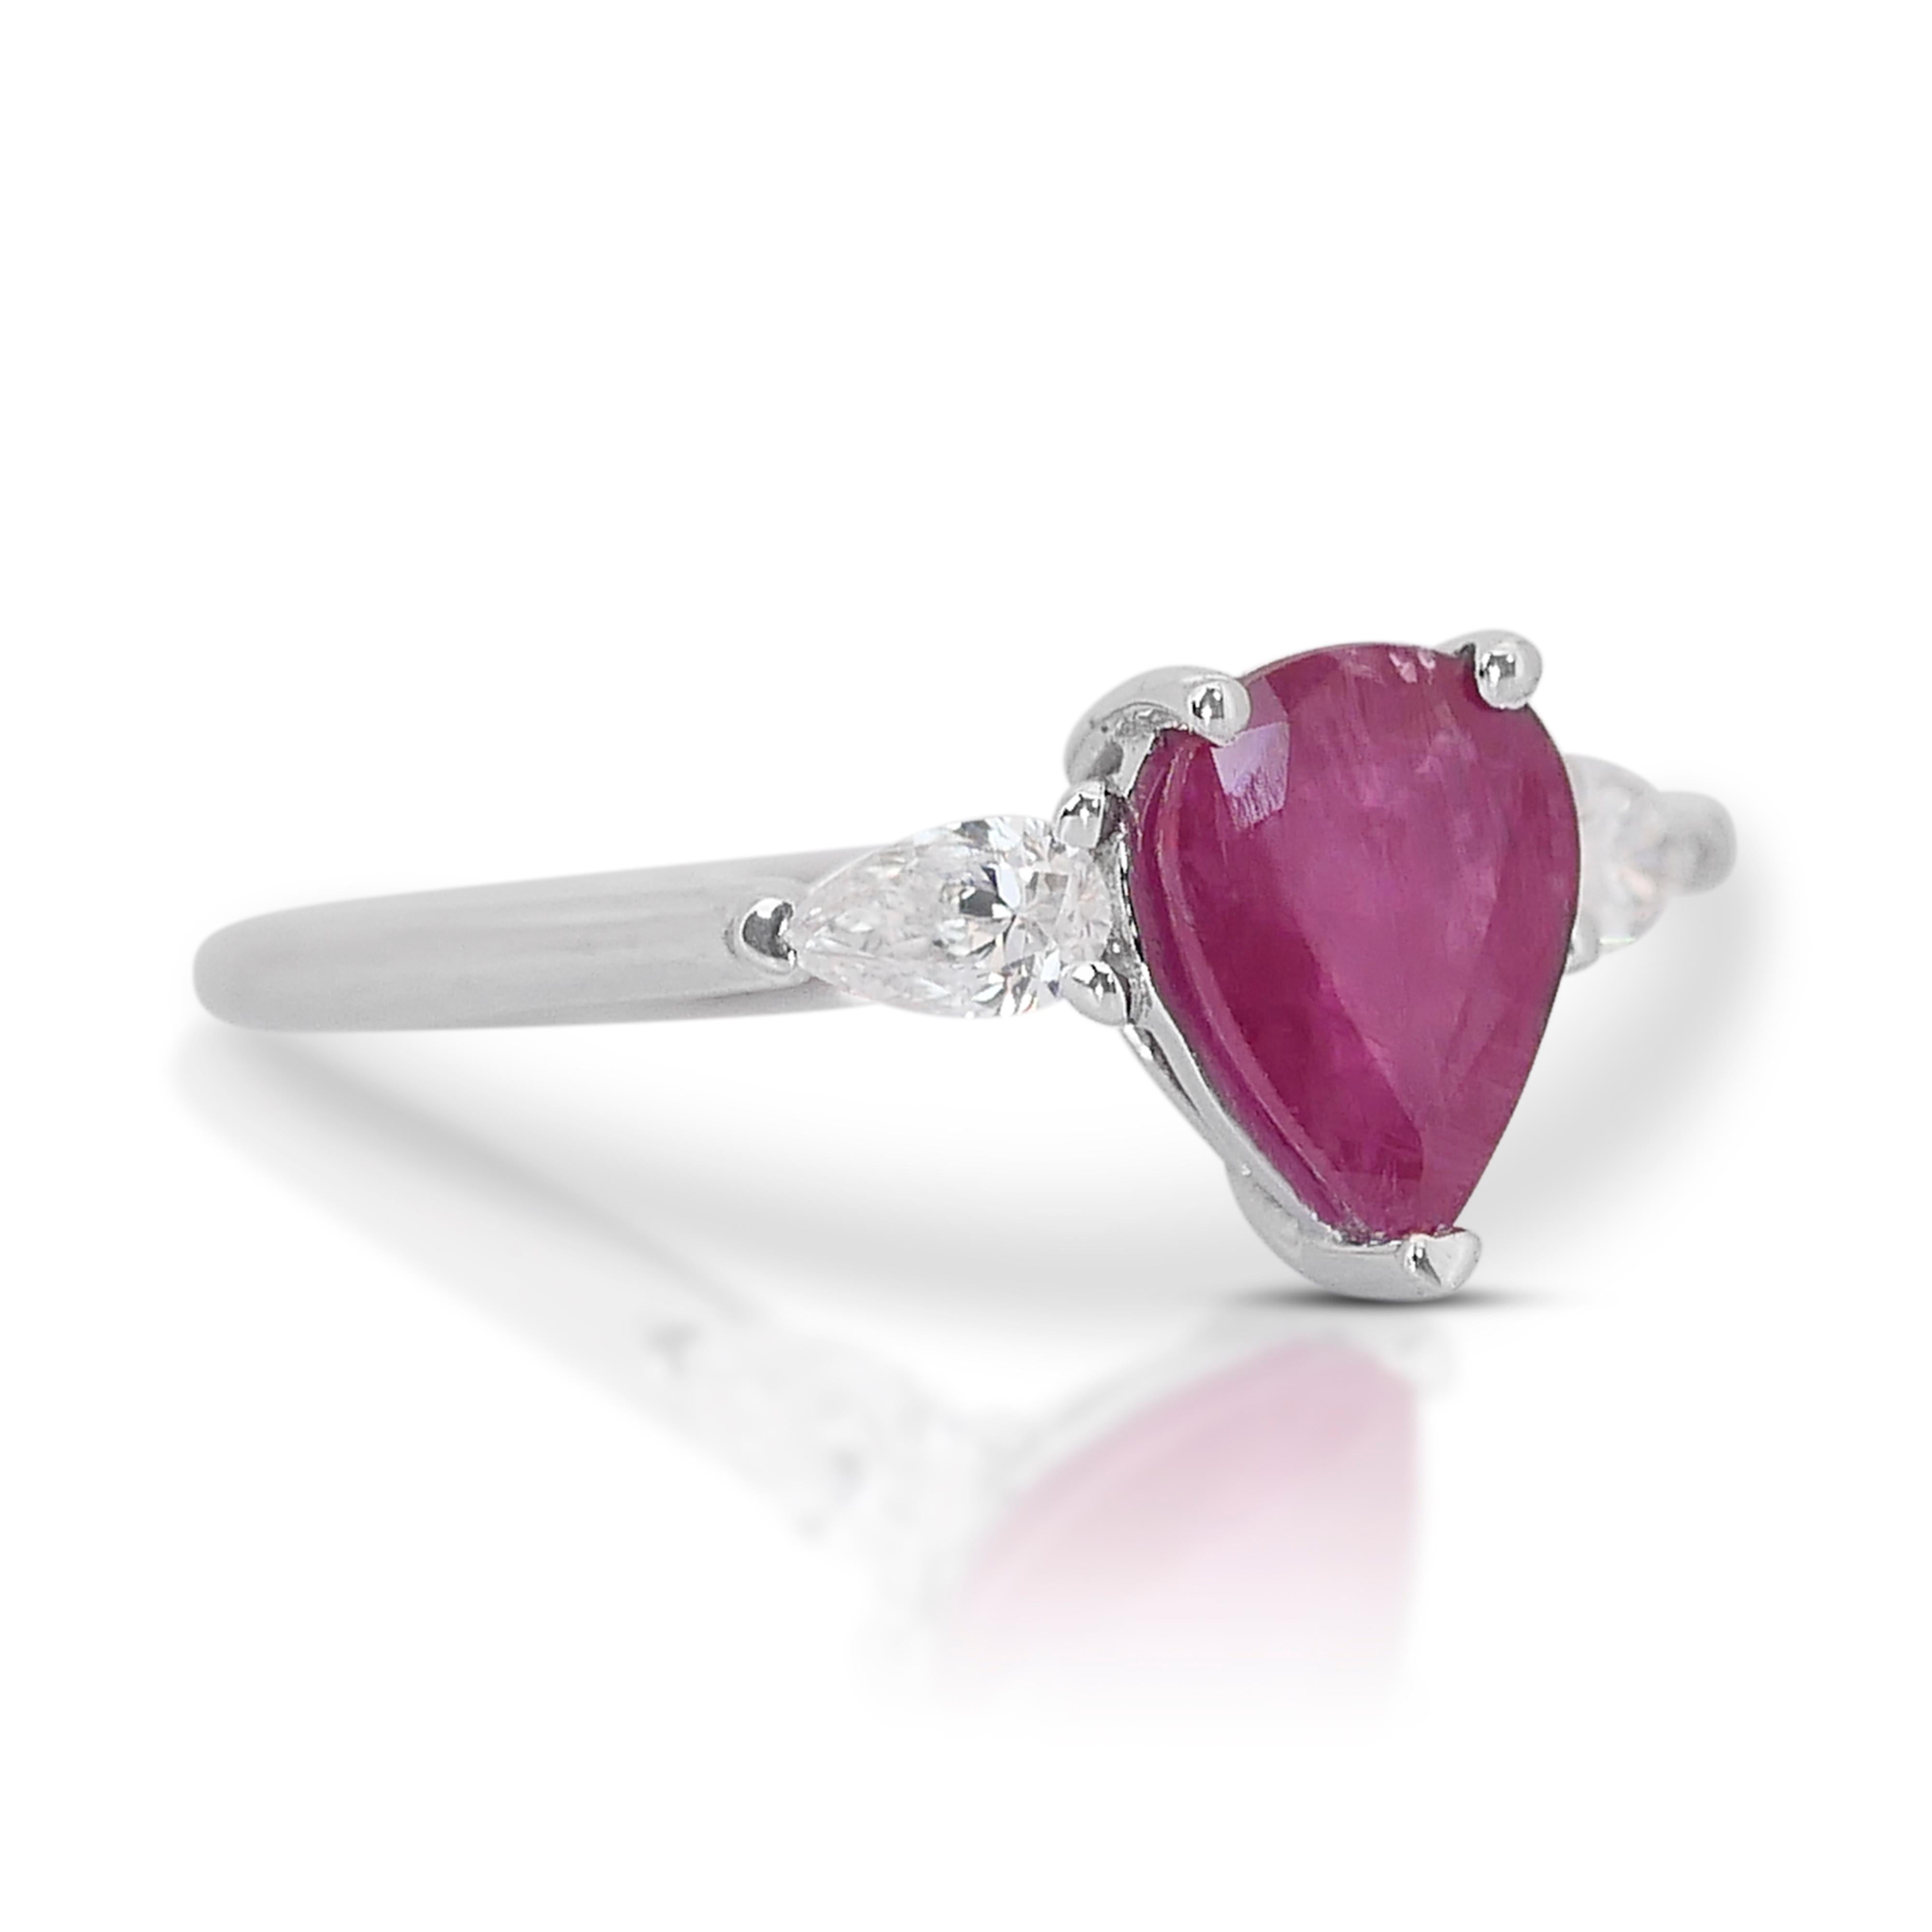 Mixed Cut Magnificent 18K White Gold 3 Stone Ring - Diamond & Ruby w/ 1.31ct- IGI Cert For Sale